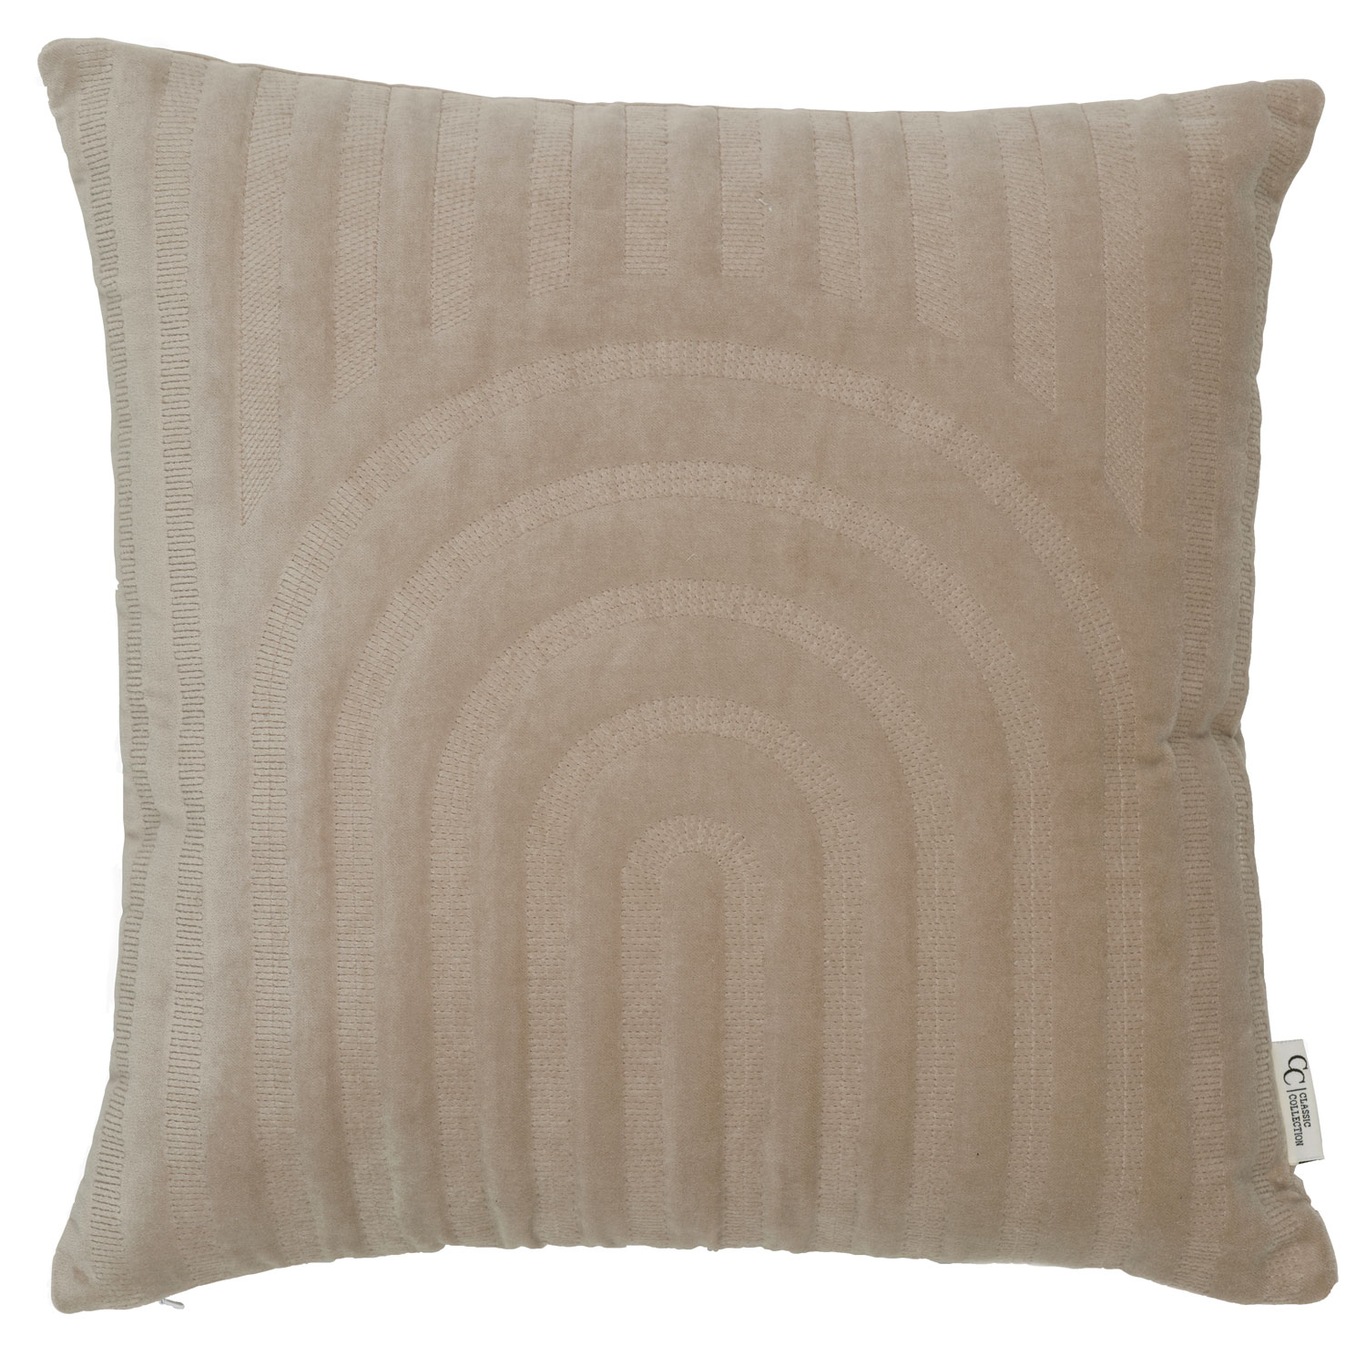 Arch Kuddfodral 50x50 cm, Taupe